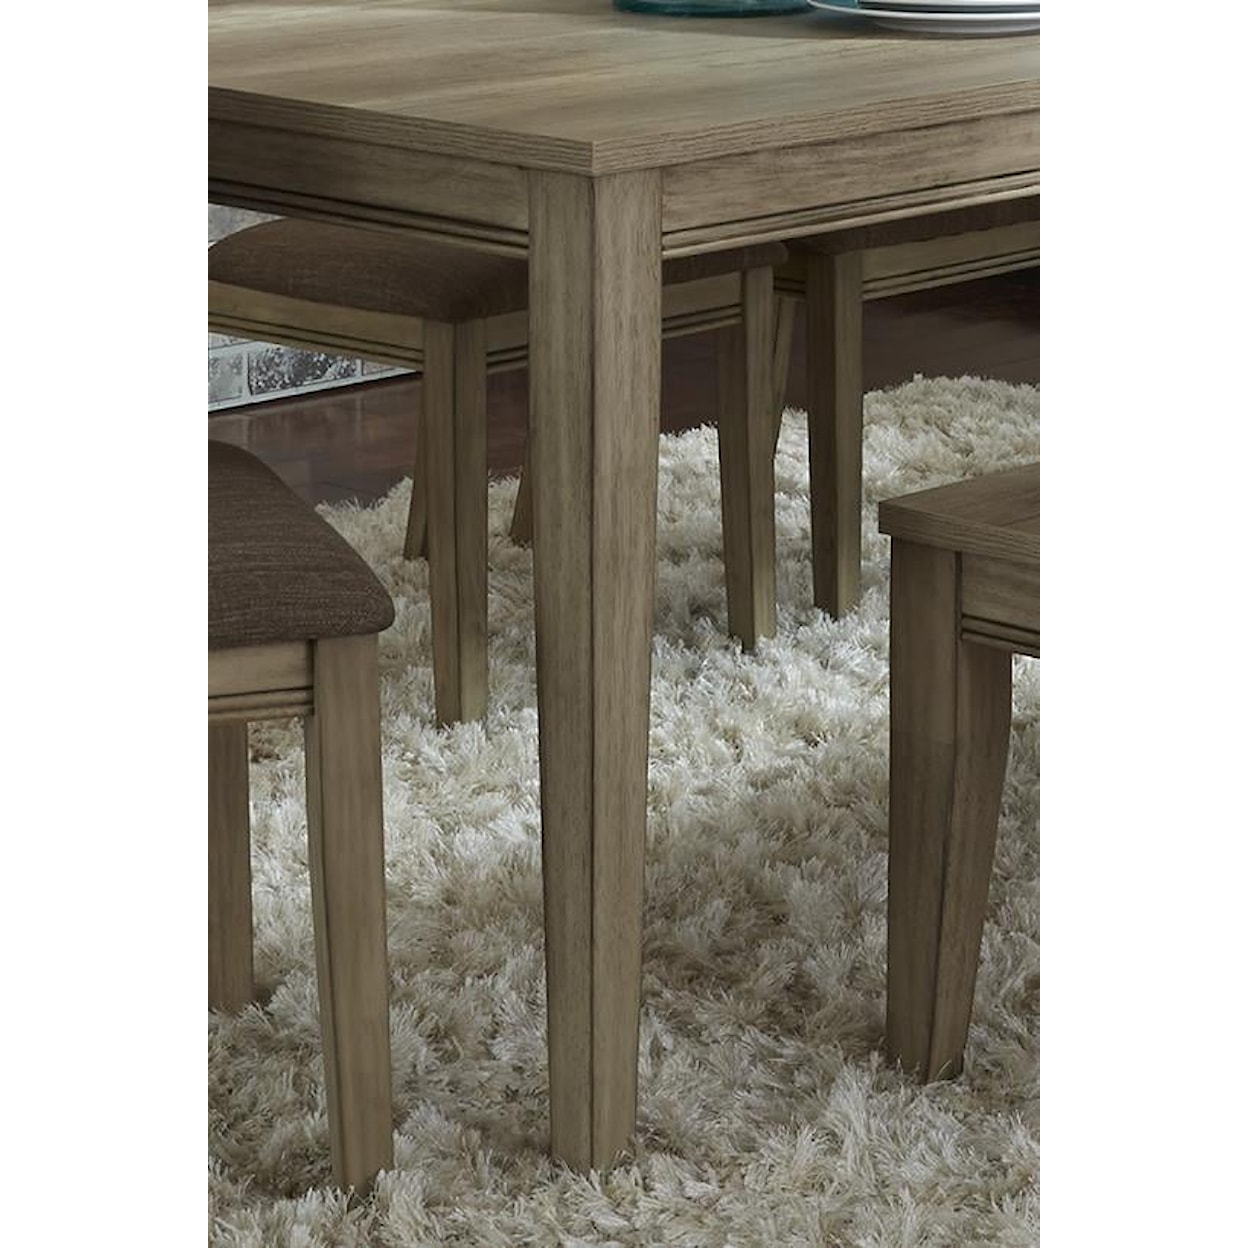 Liberty Furniture Sun Valley Dining Table